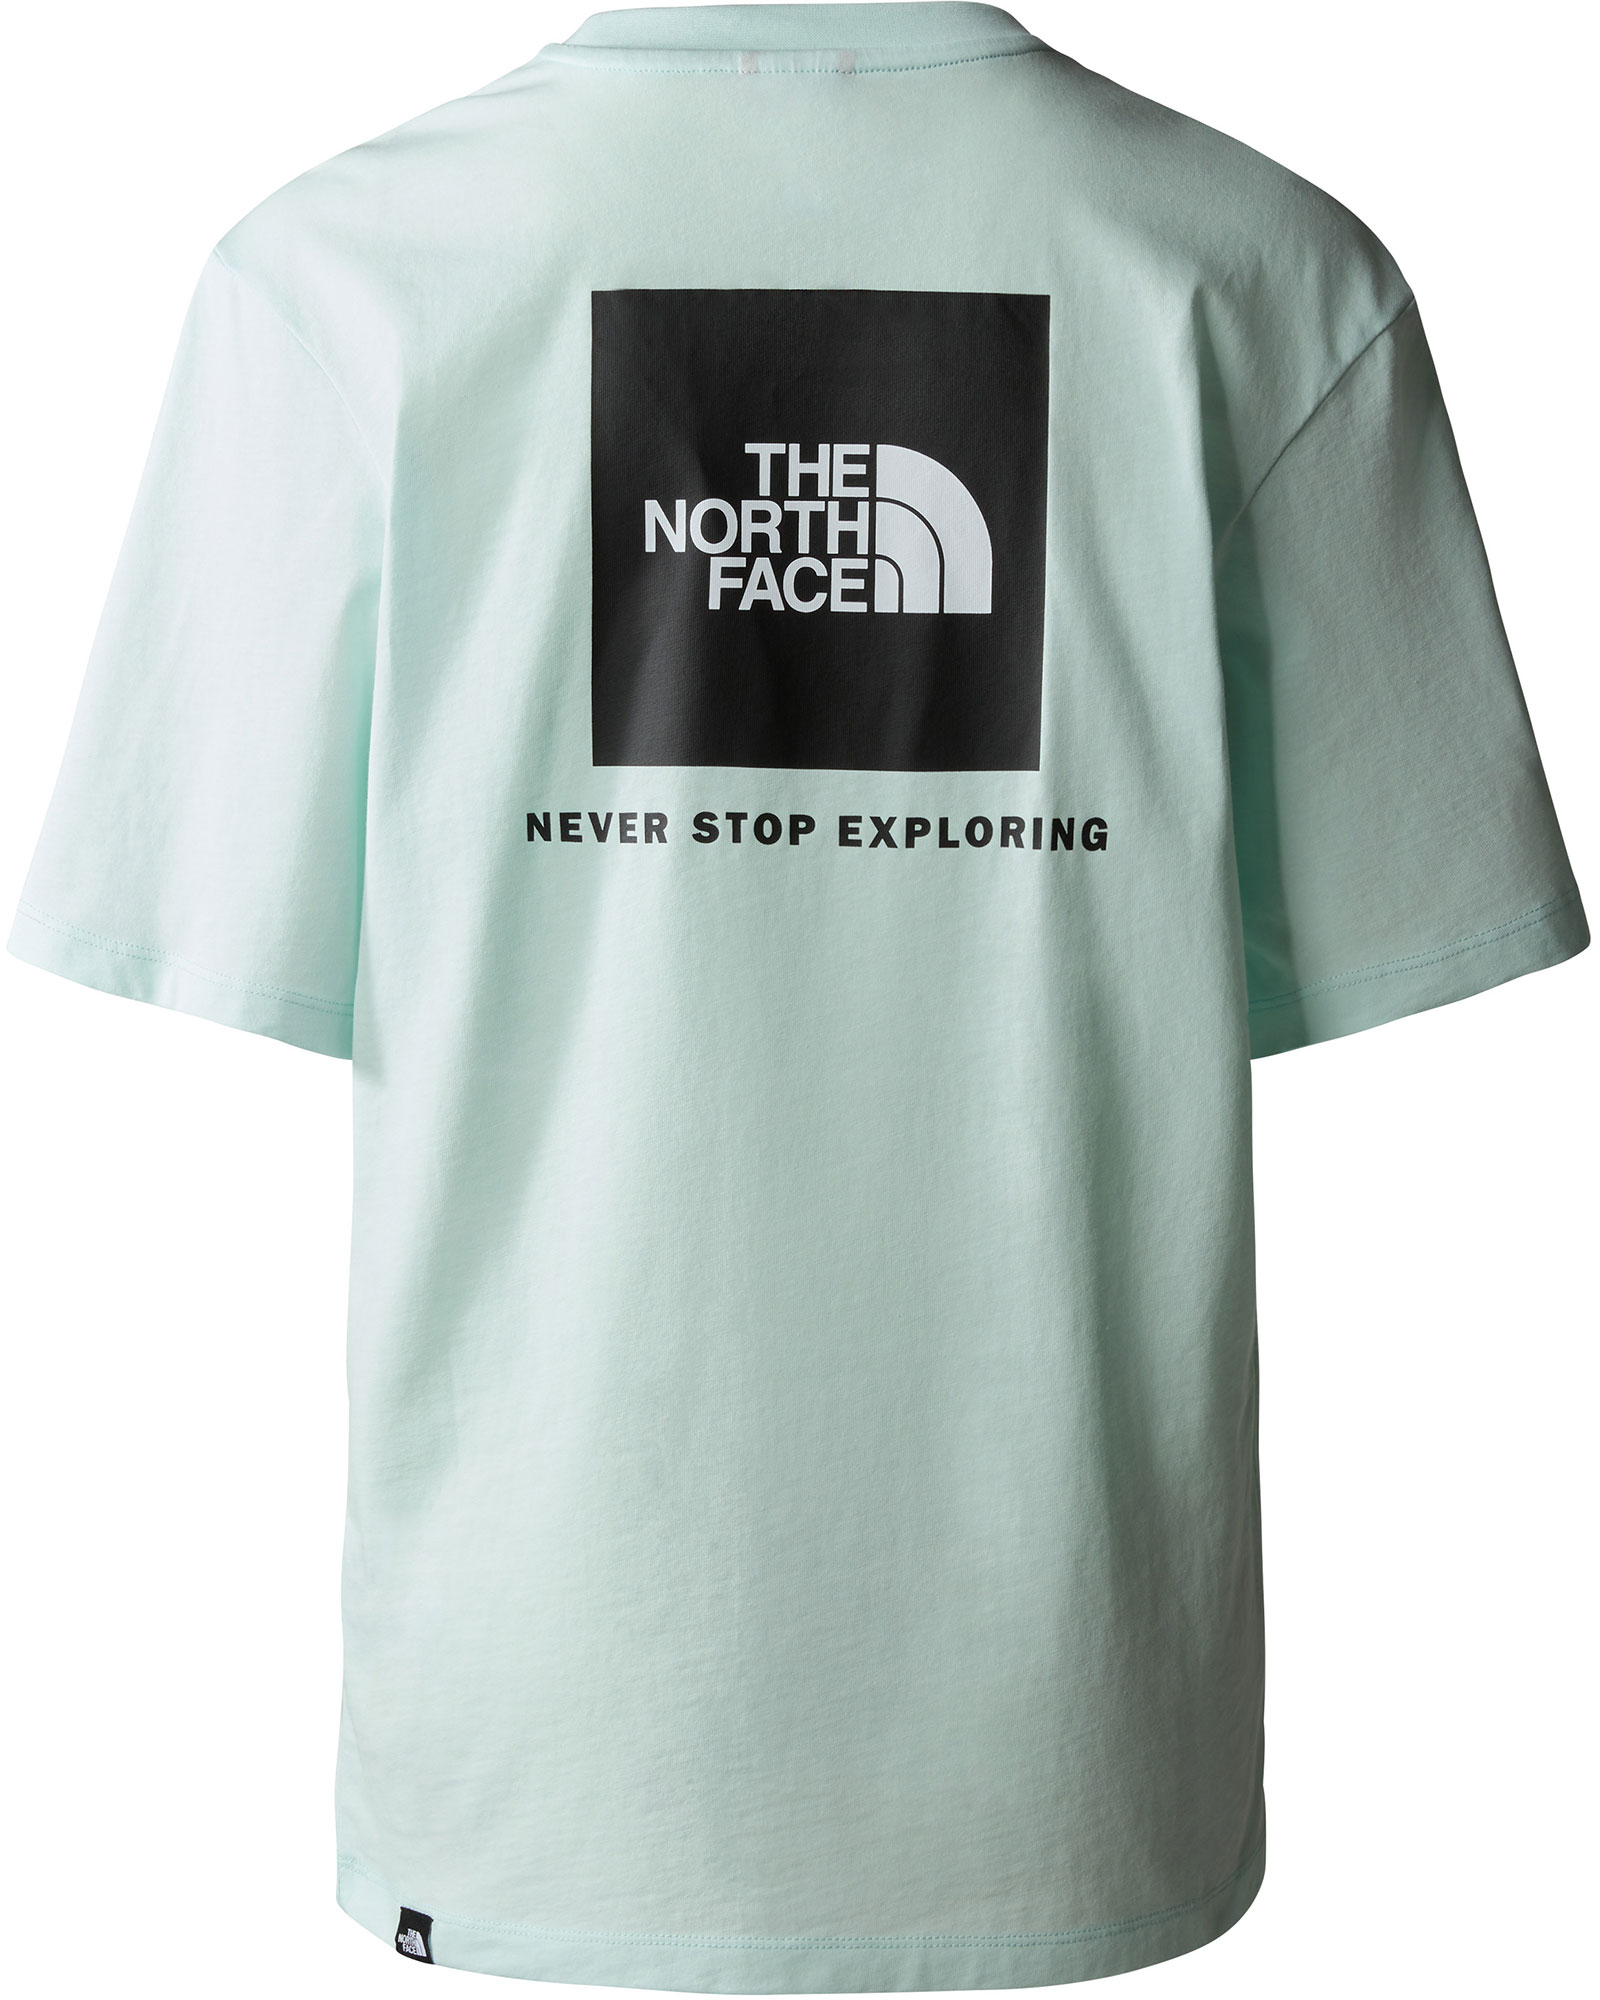 The North Face Relaxed Redbox Women’s T Shirt - Skylight Blue M